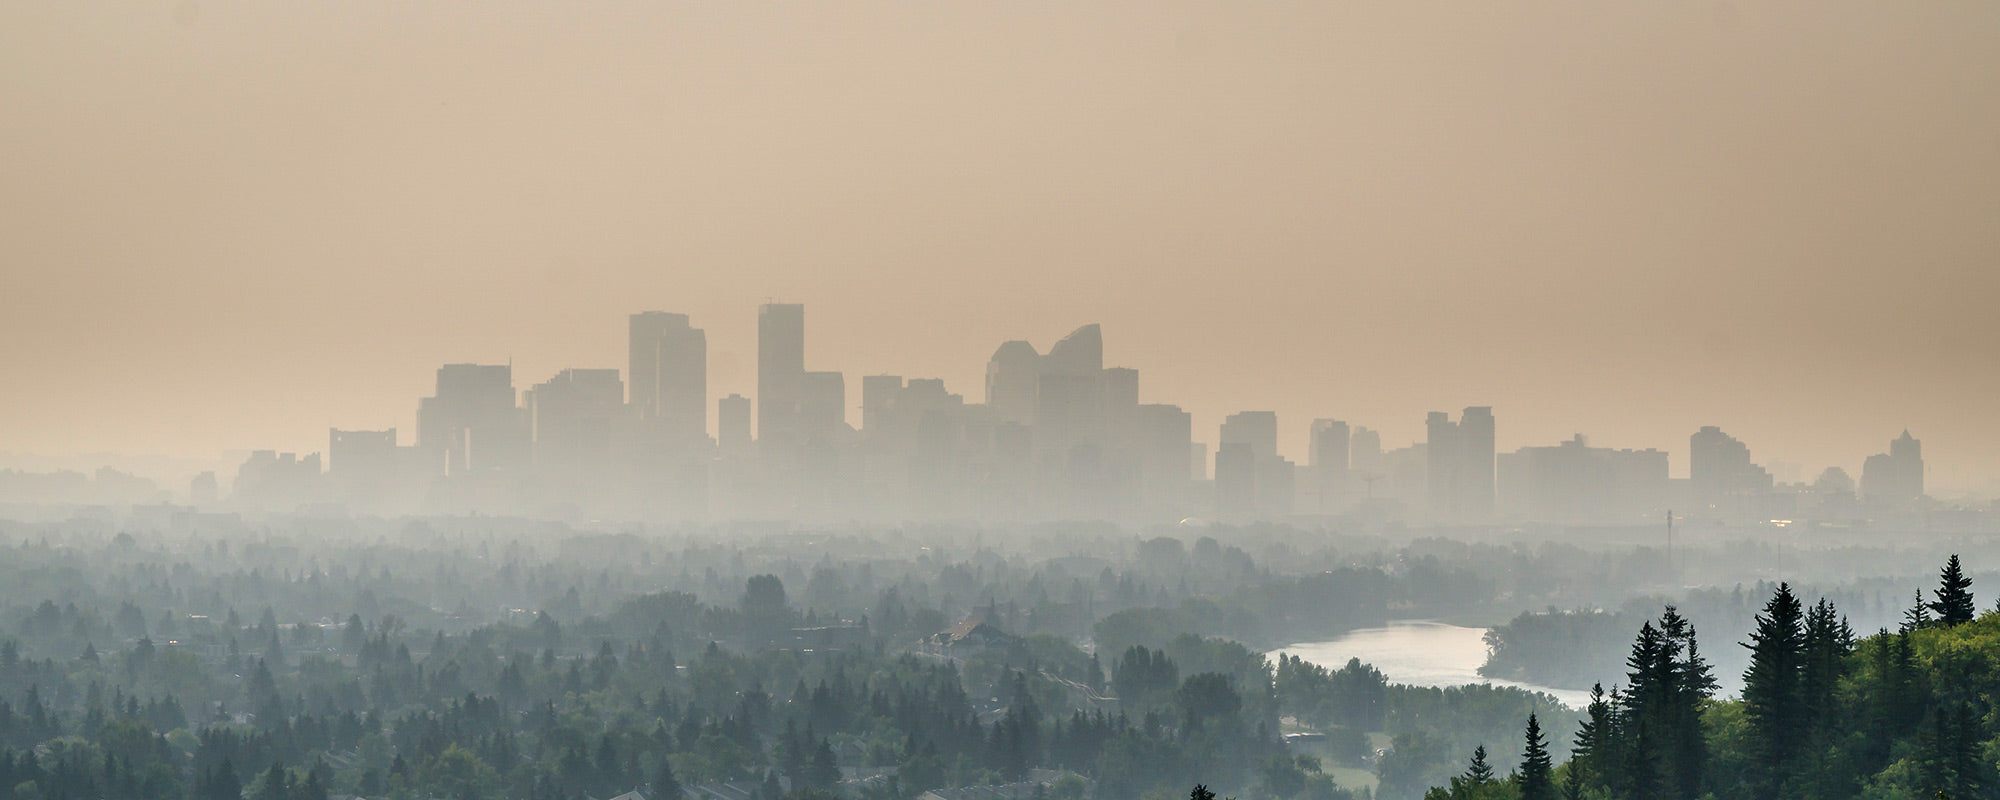 Is Air Pollution Getting Worse?